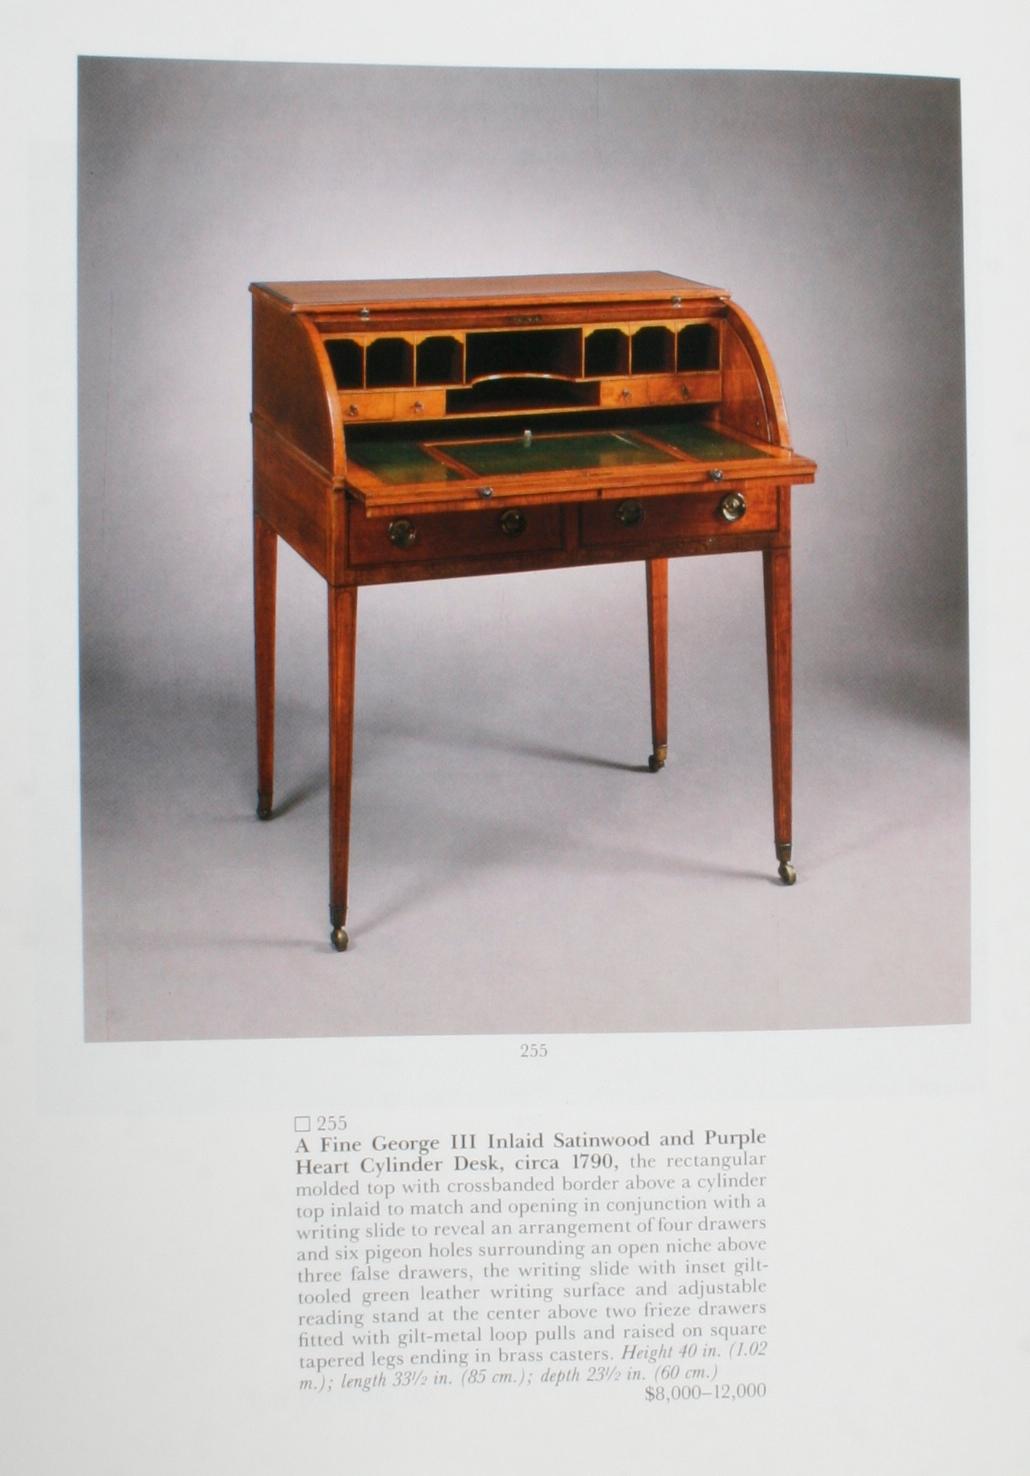 Paper Sotheby's, English Porcelain and Furniture Mr. and Mrs John Treleaven Oct, 1990 For Sale